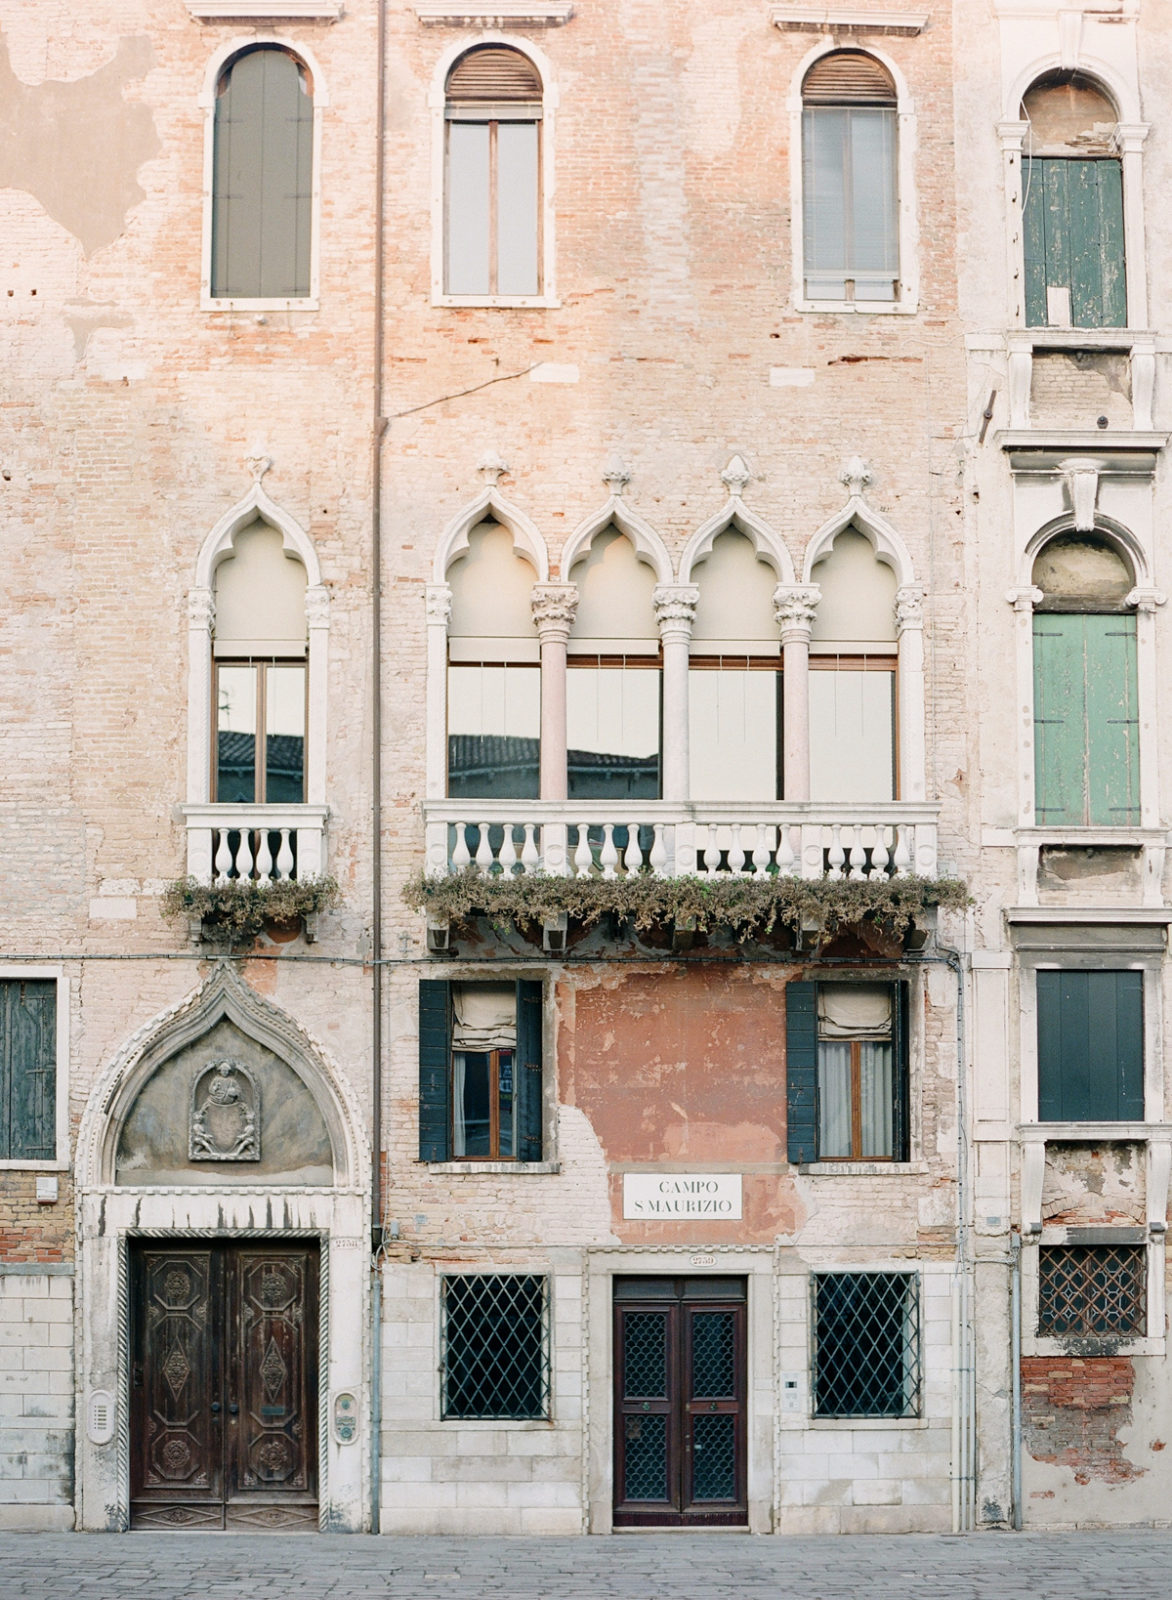 Venice Wedding Photographer | Italy Film Photography | Molly Carr Photography | Venice Architecture